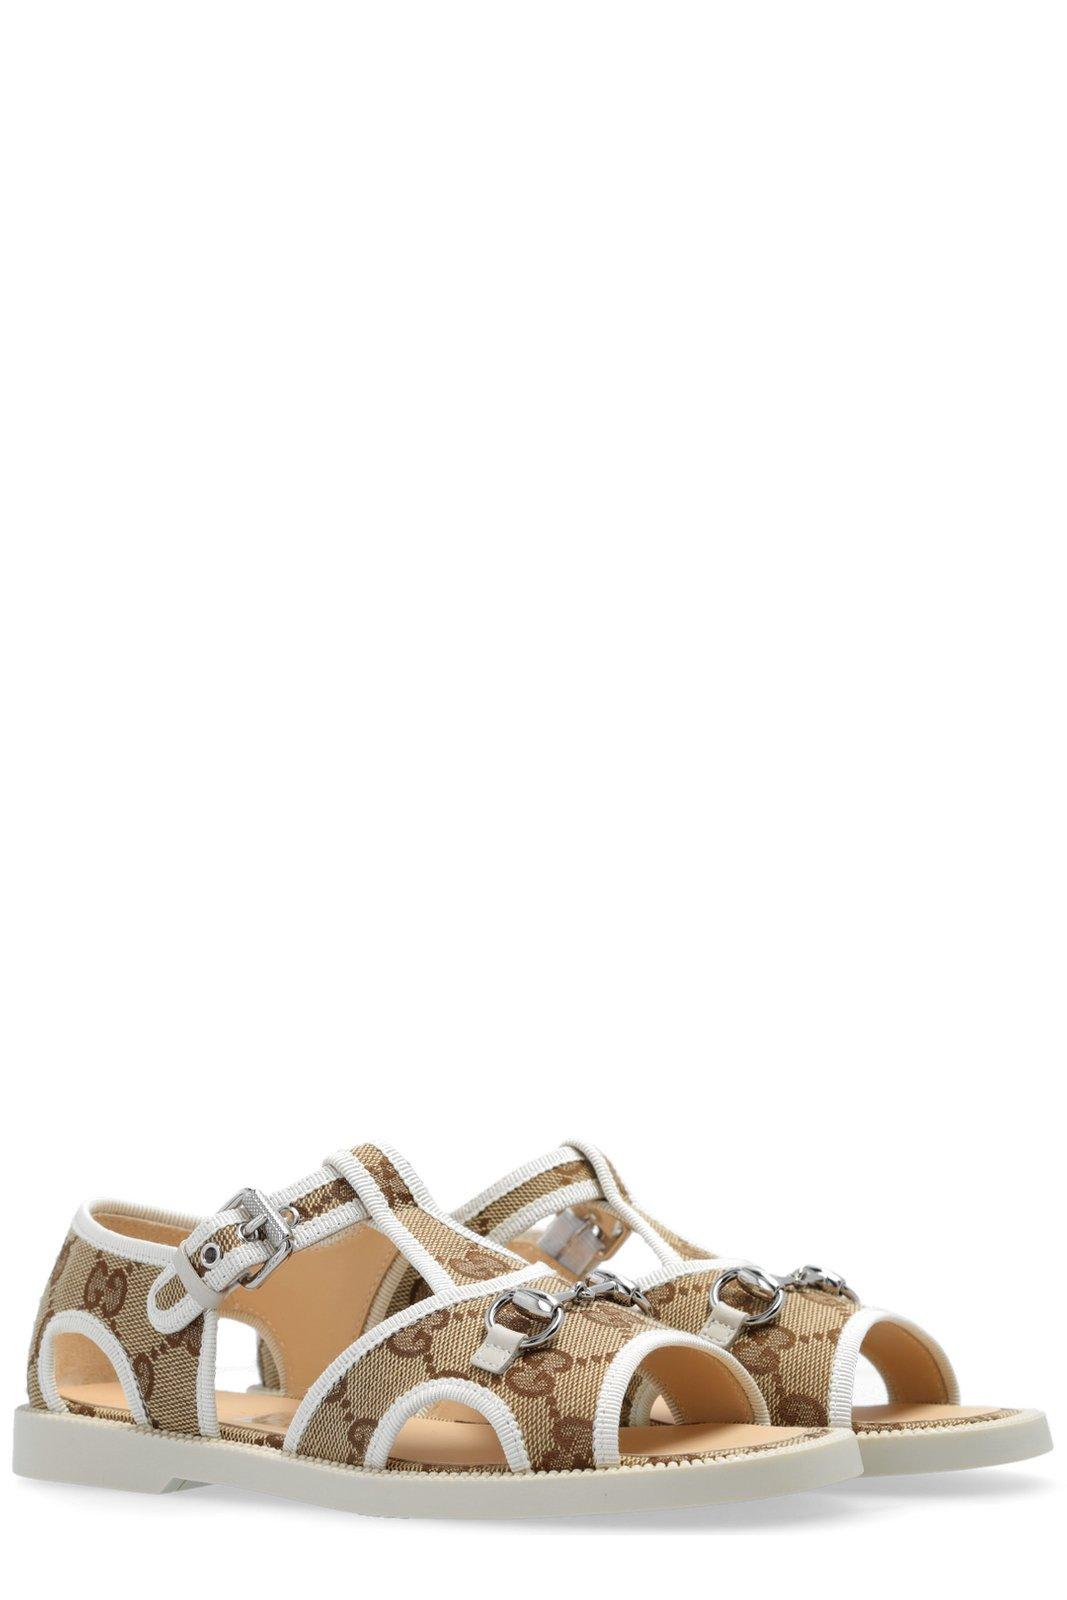 Shop Gucci Buckled Open Toe Sandals In Bianco